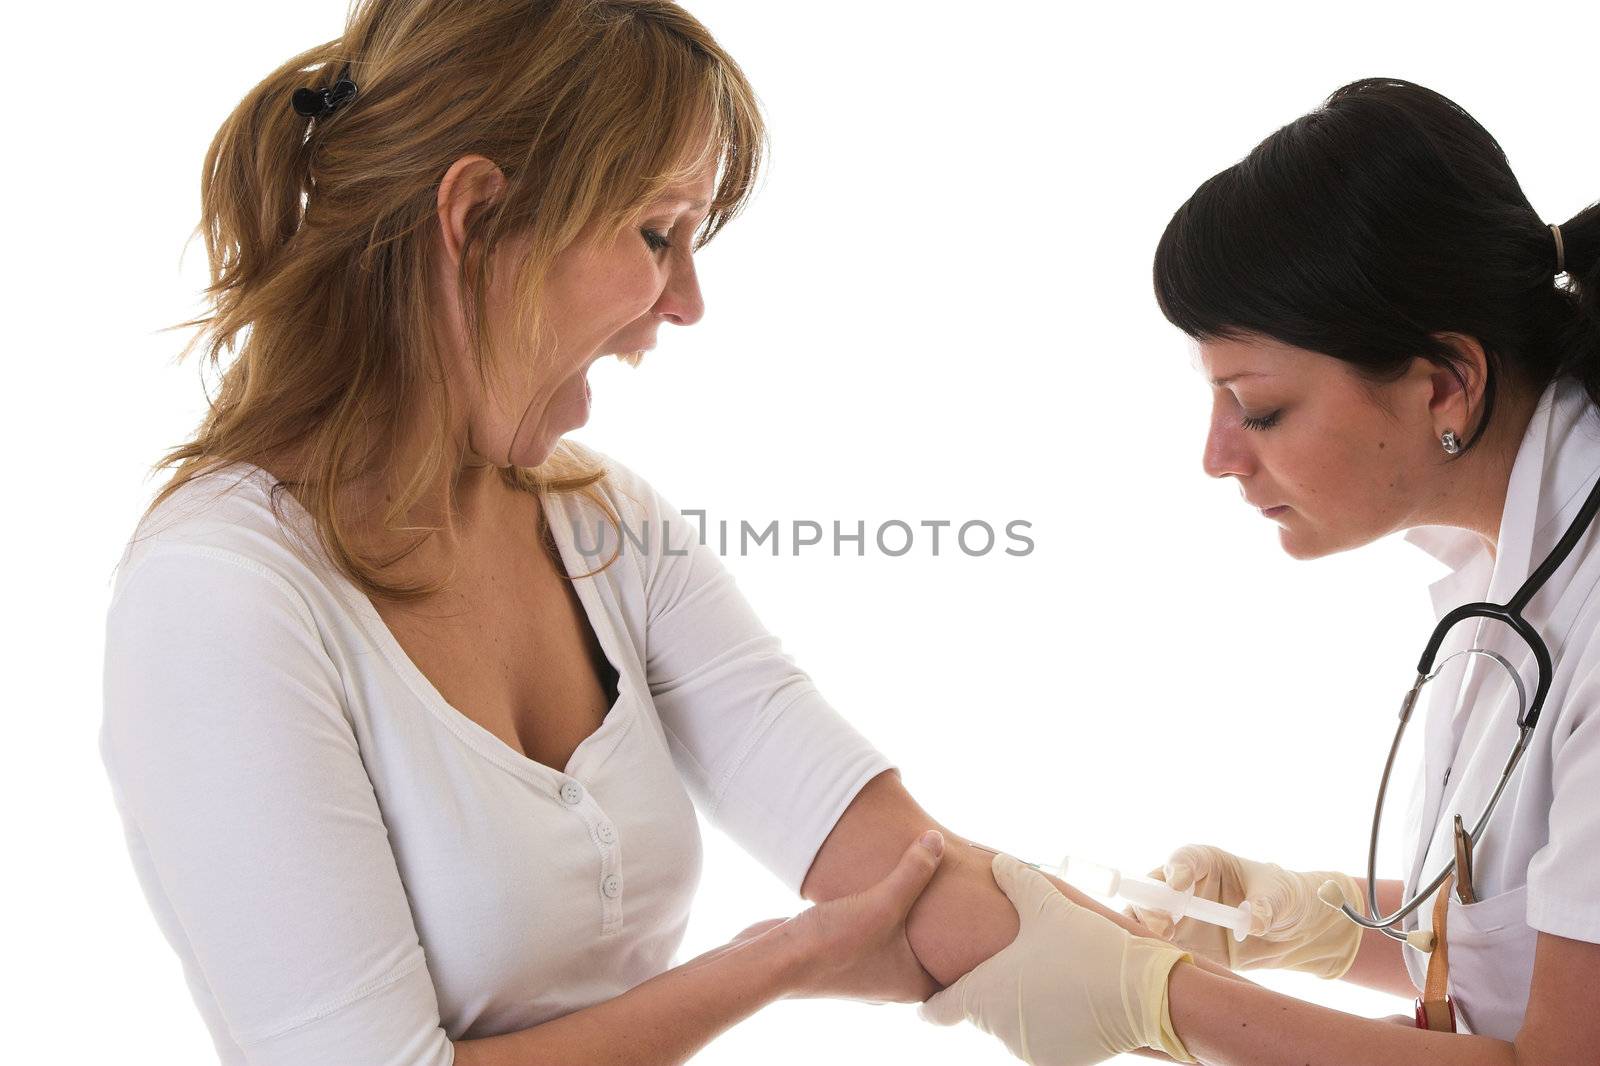 Woman screaming before the needle of the injection even hits her arm